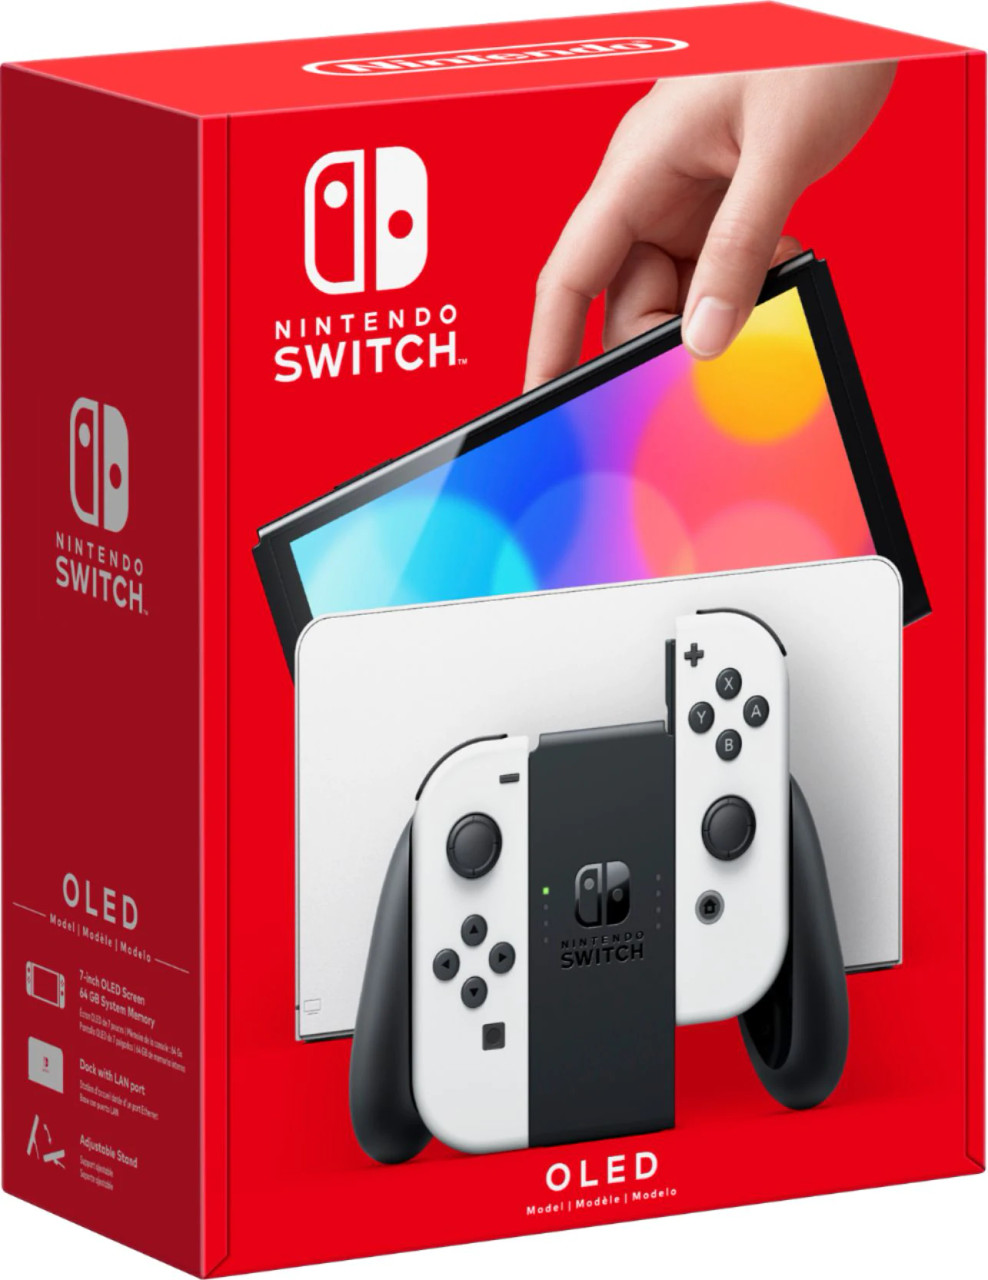 Nintendo Switch OLED | Mojo Online Price Computers Buy | Model Best At